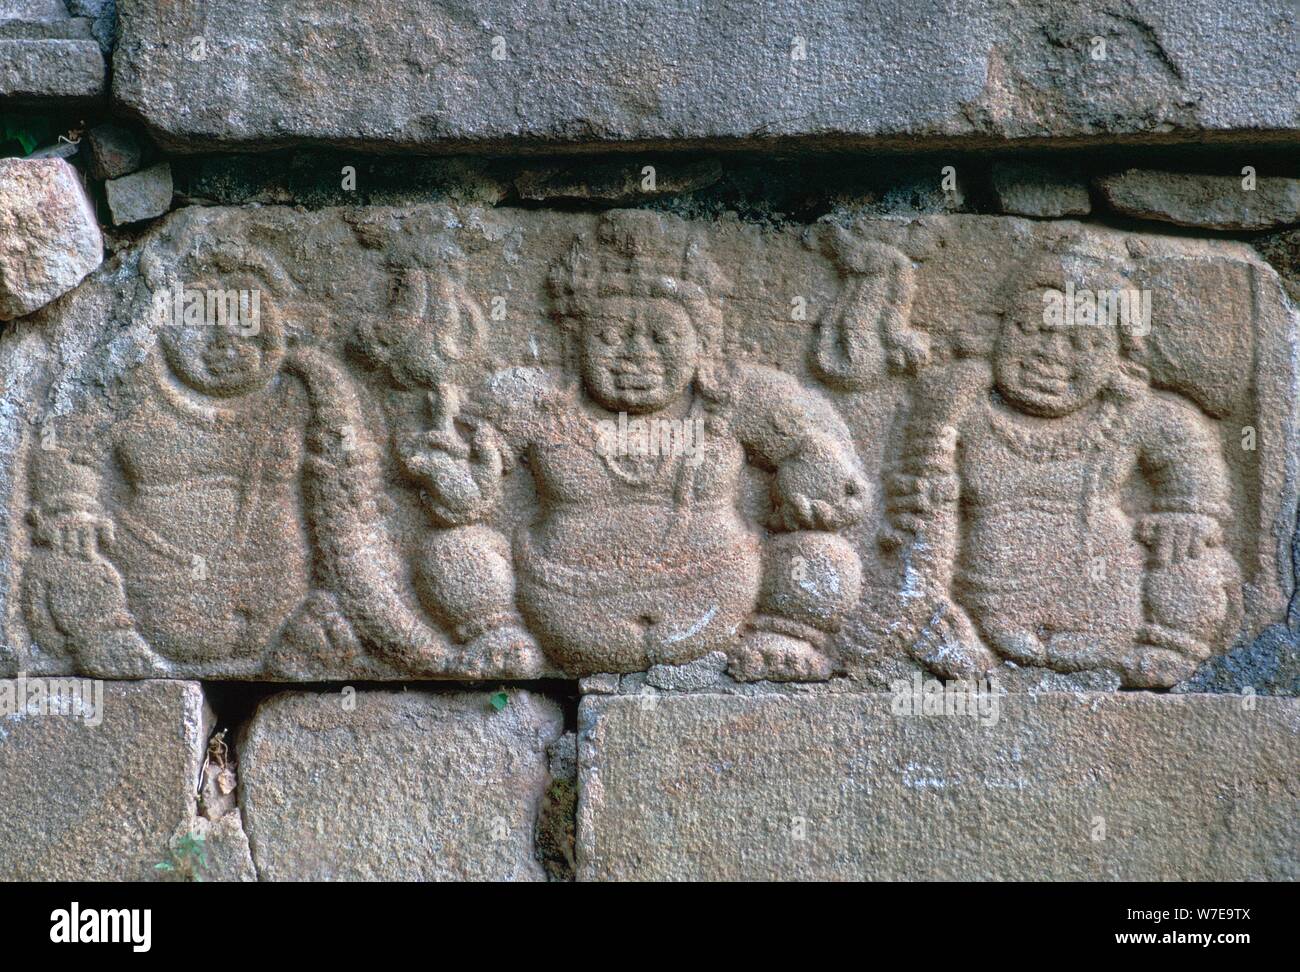 Dwarf figures on a building in the Buddhist city of Anuradhapura. Artist: Unknown Stock Photo